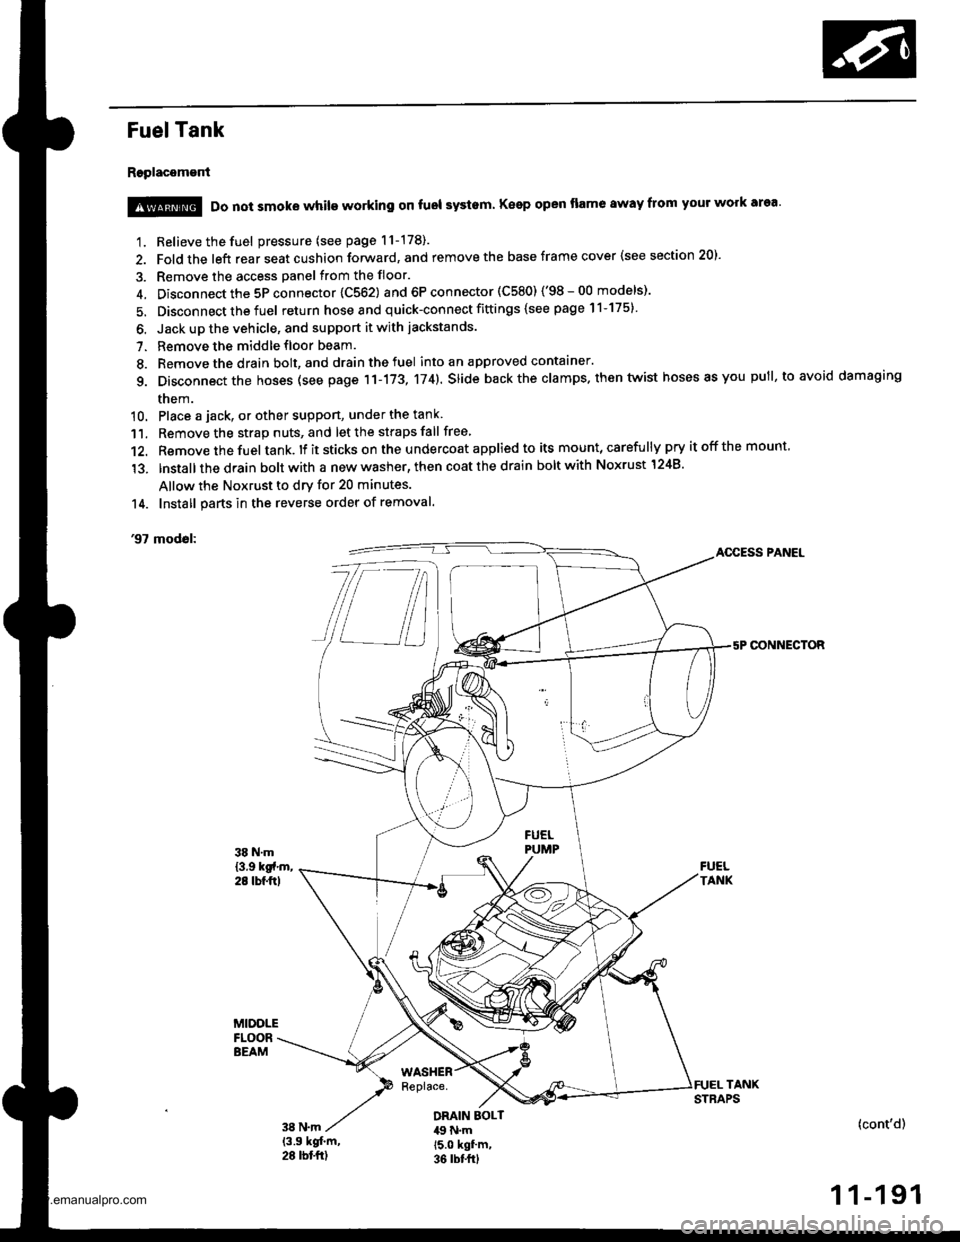 HONDA CR-V 2000 RD1-RD3 / 1.G Workshop Manual 
Fuel Tank
Replacement
1. Relieve the fuel pressure (see page 11-178).
2. Fold the left rear seat cushion forward, and remove the base frame cover {see section 20).
3. Remove the access panel from the